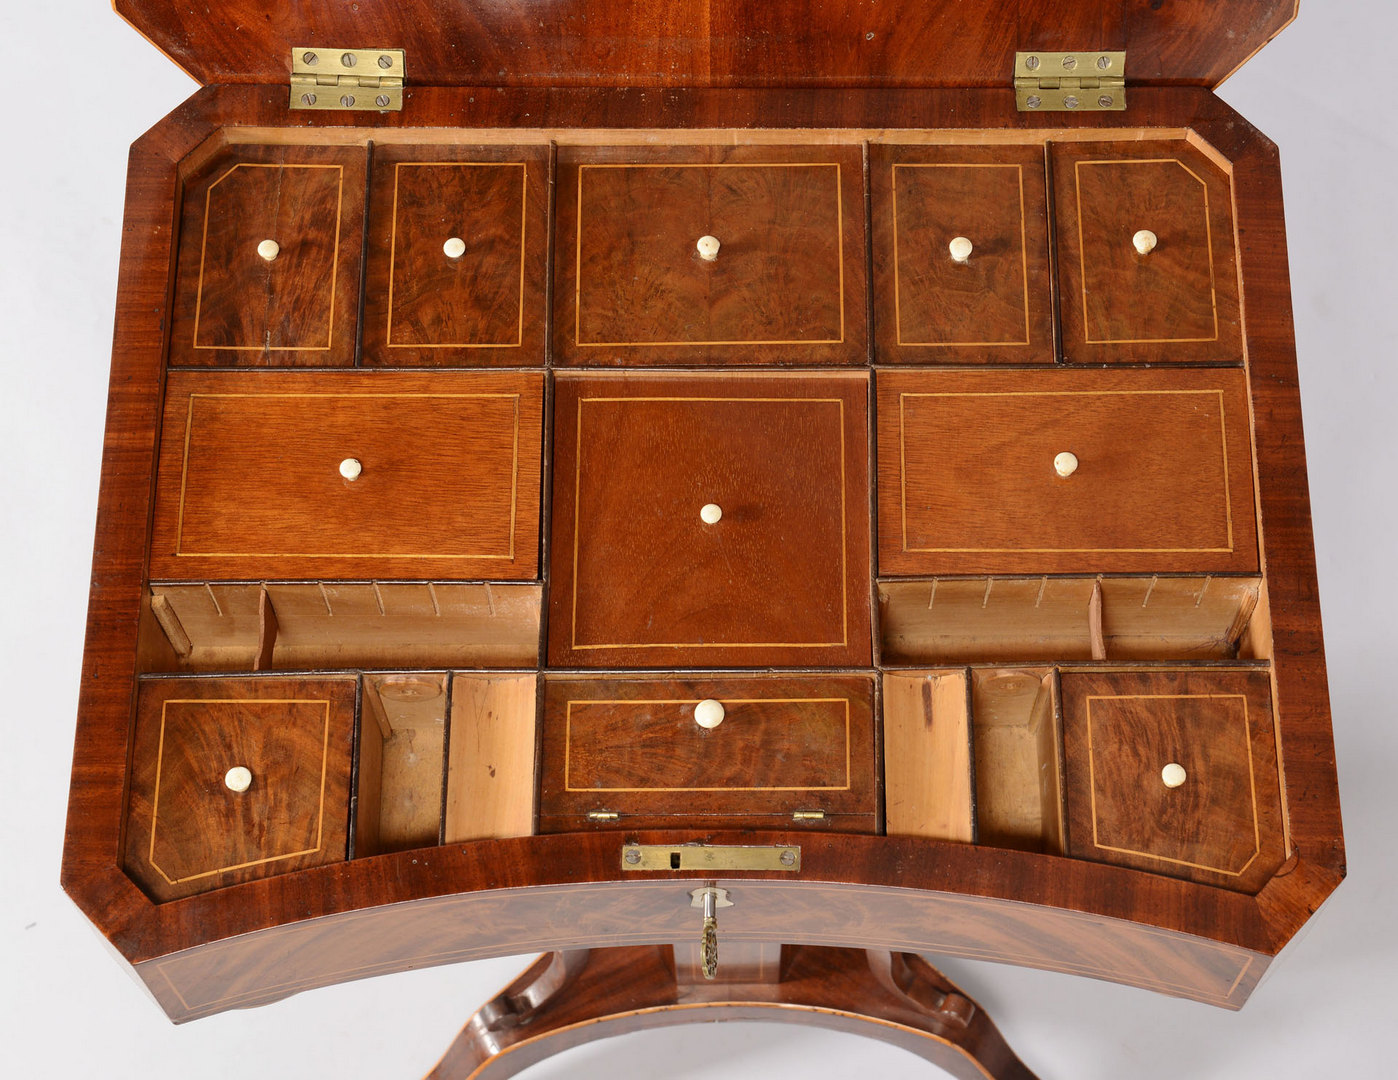 Lot 261: Inlaid Classical Sewing Stand, Possibly English